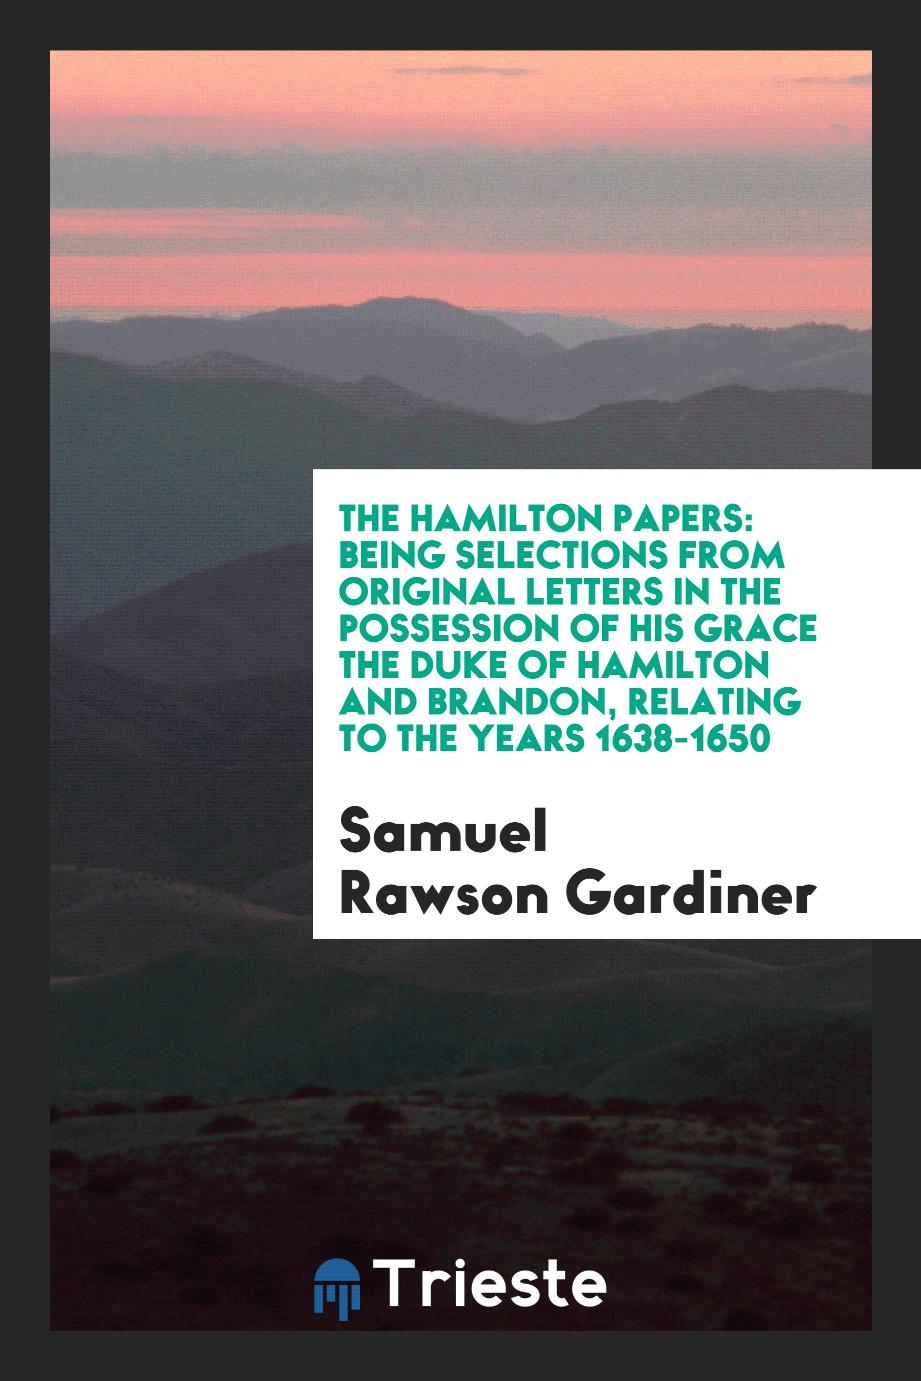 The Hamilton Papers: being selections from original letters in the possession of his grace the duke of Hamilton and Brandon, relating to the years 1638-1650